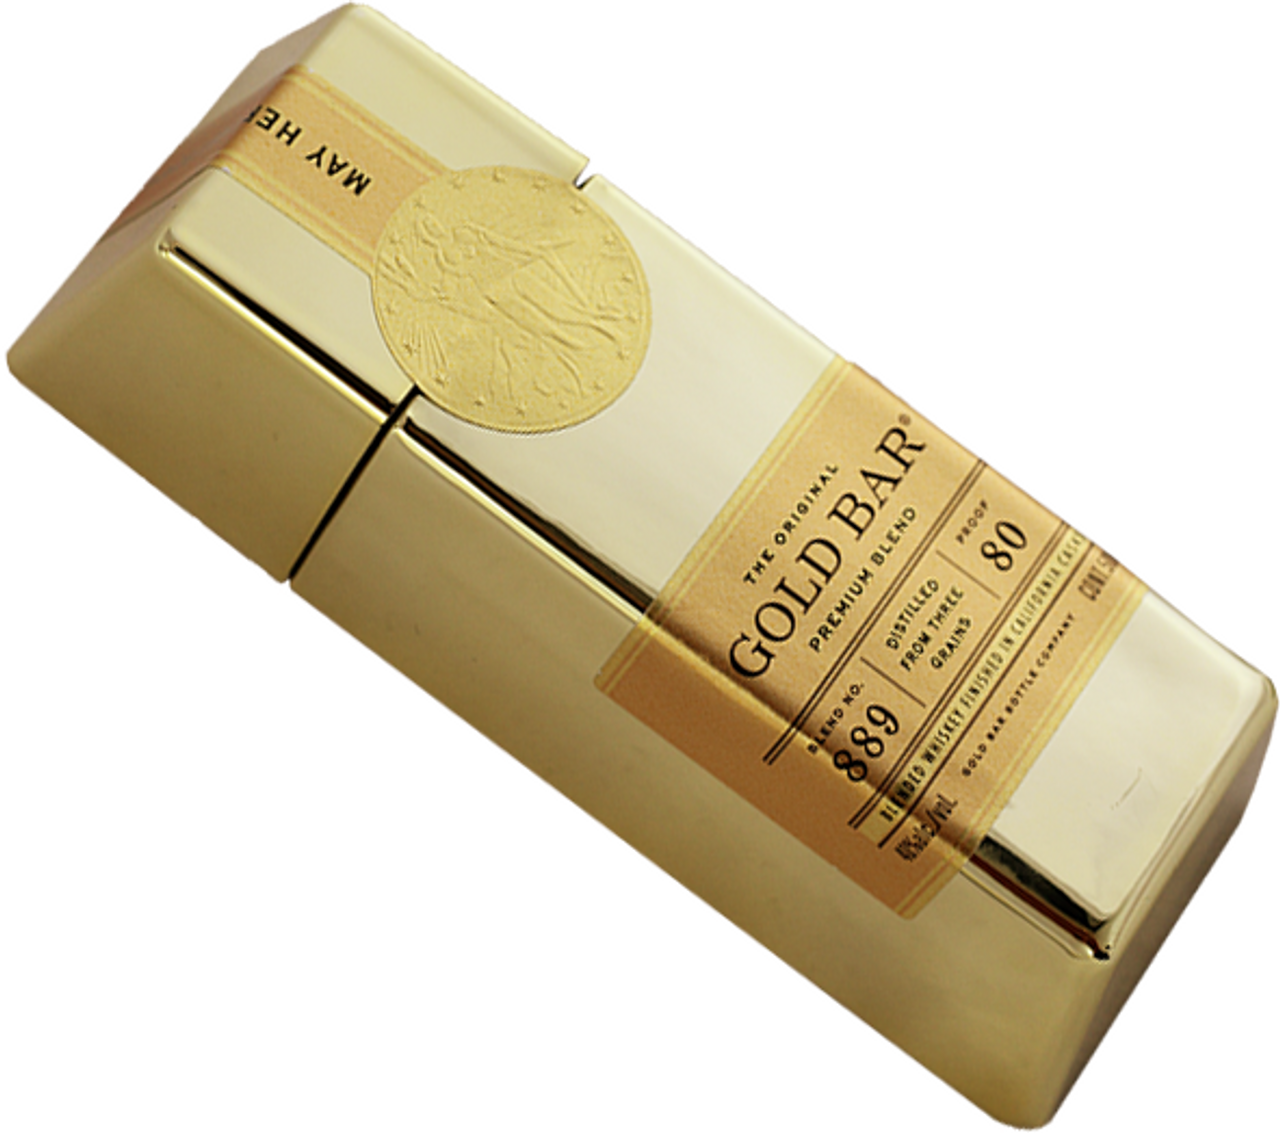 Gold Bar Original, 50ml - Official Whiskey of the San Francisco Forty Niners